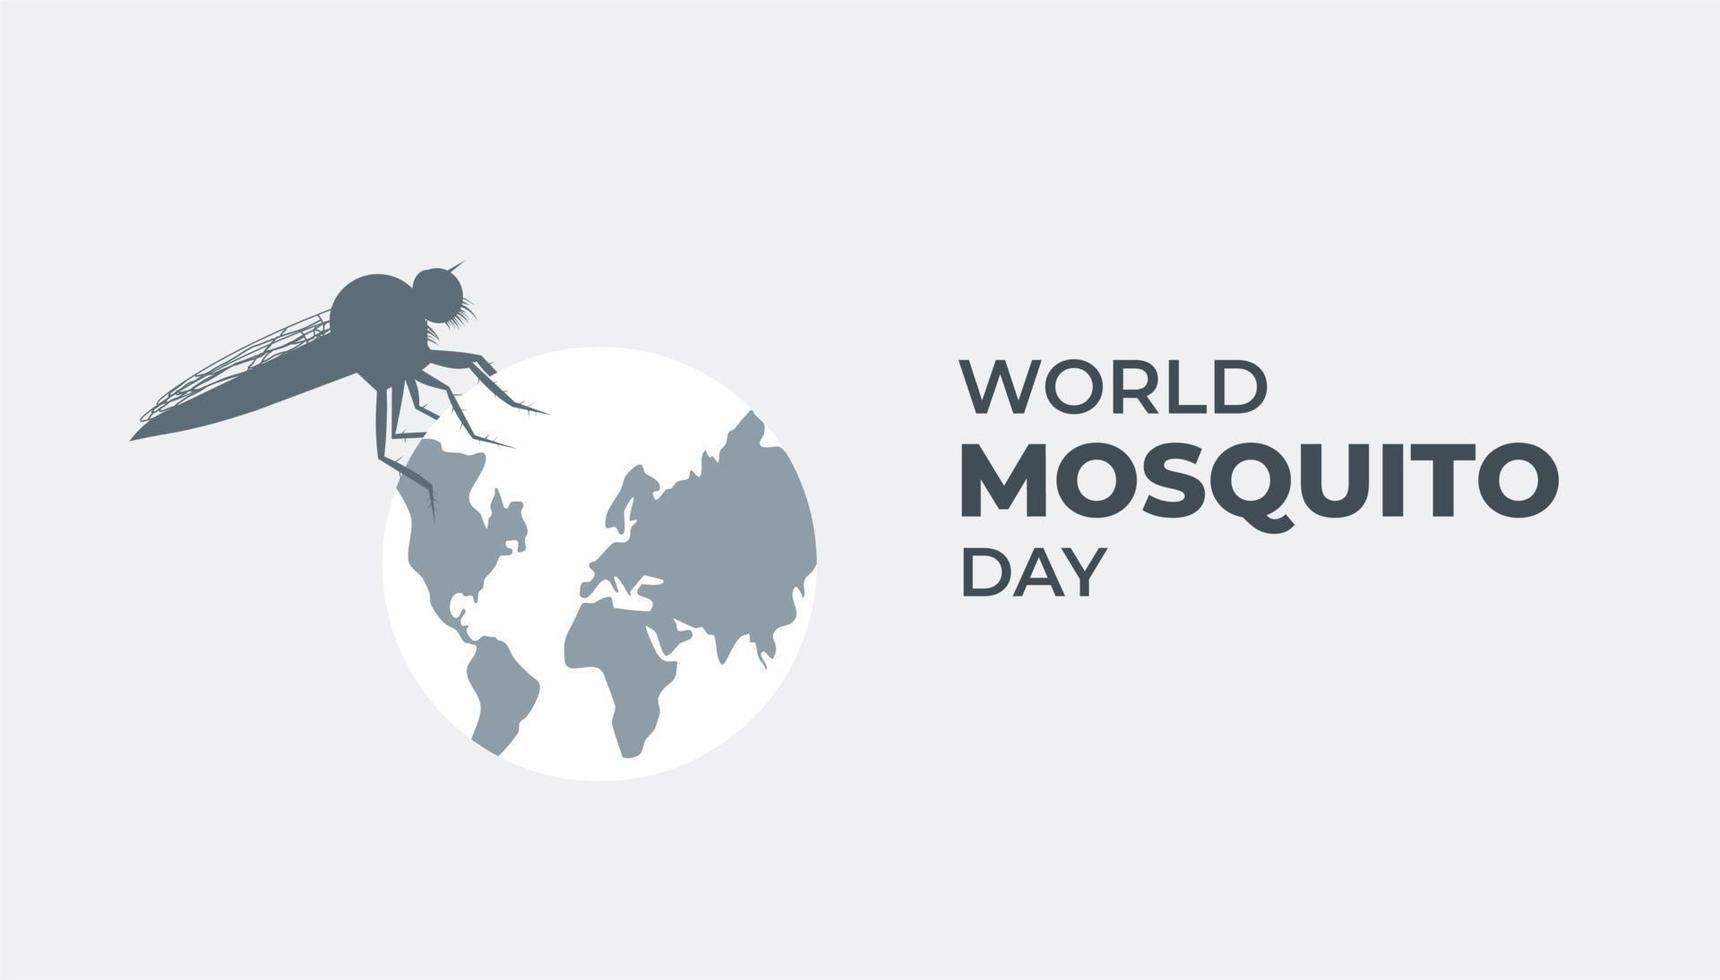 World Mosquito Day Poster Background Event Vector Illustration to Raise Awareness about Malaria